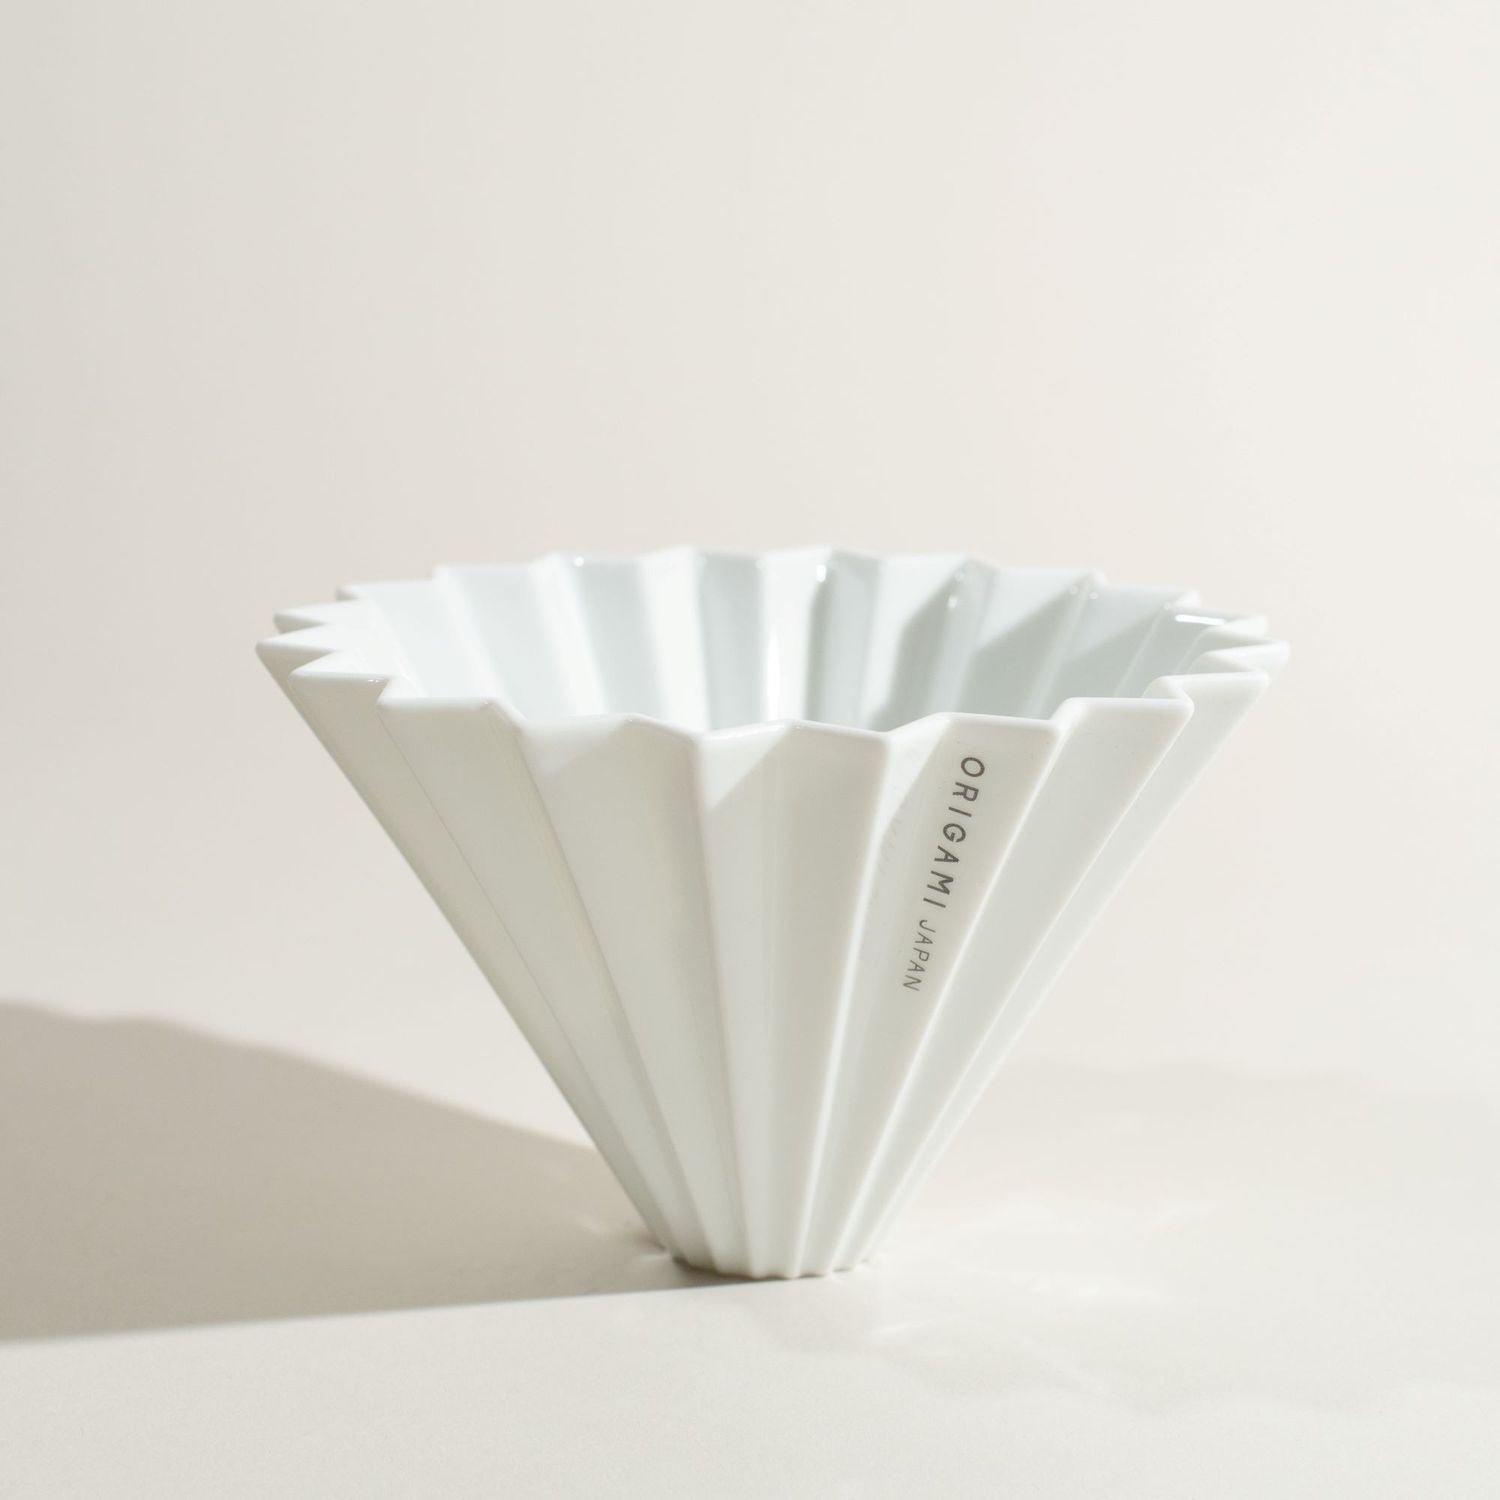 WHITE ORIGAMI COFFEE DRIPPER, MADE IN JAPAN WITH MINO PORCELAIN